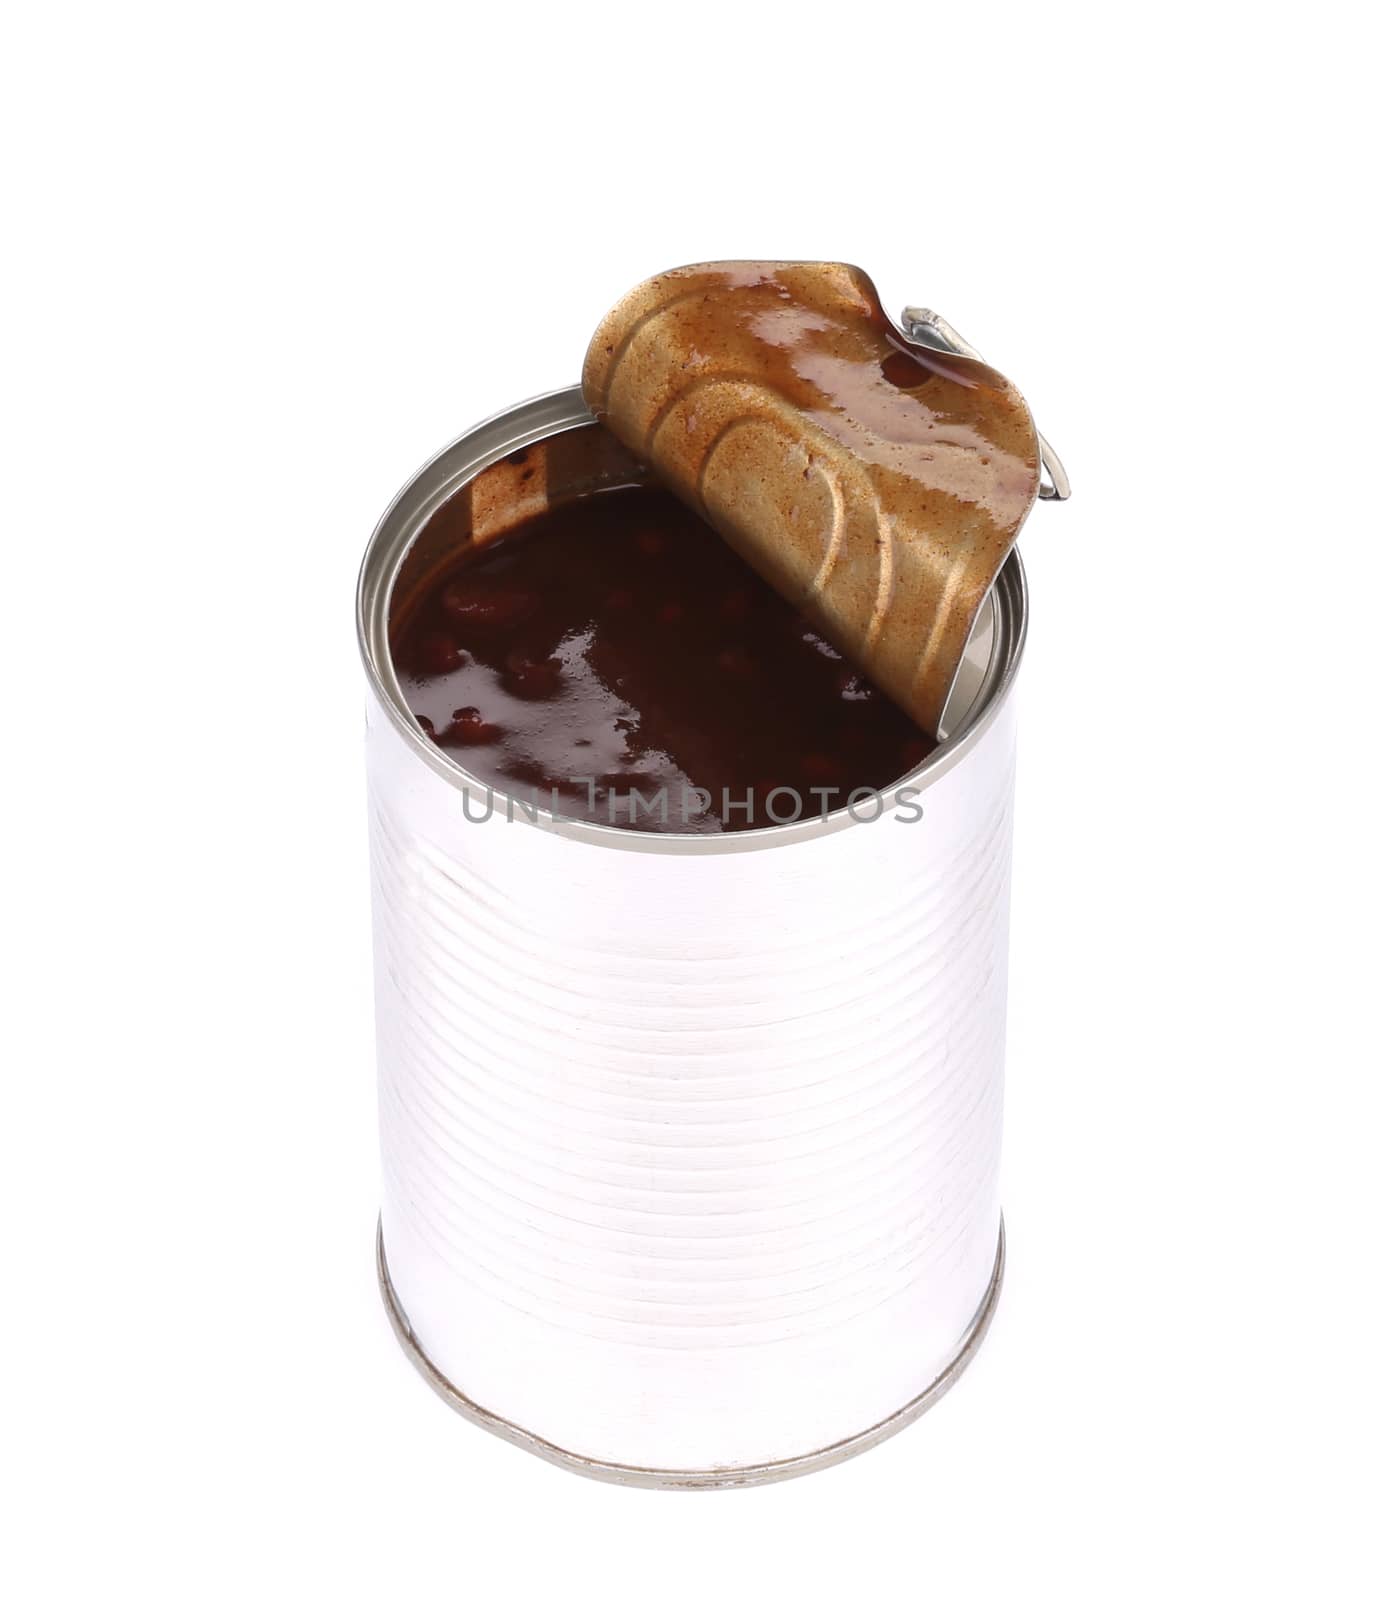 Tin with red bean. Isolated on a white background.